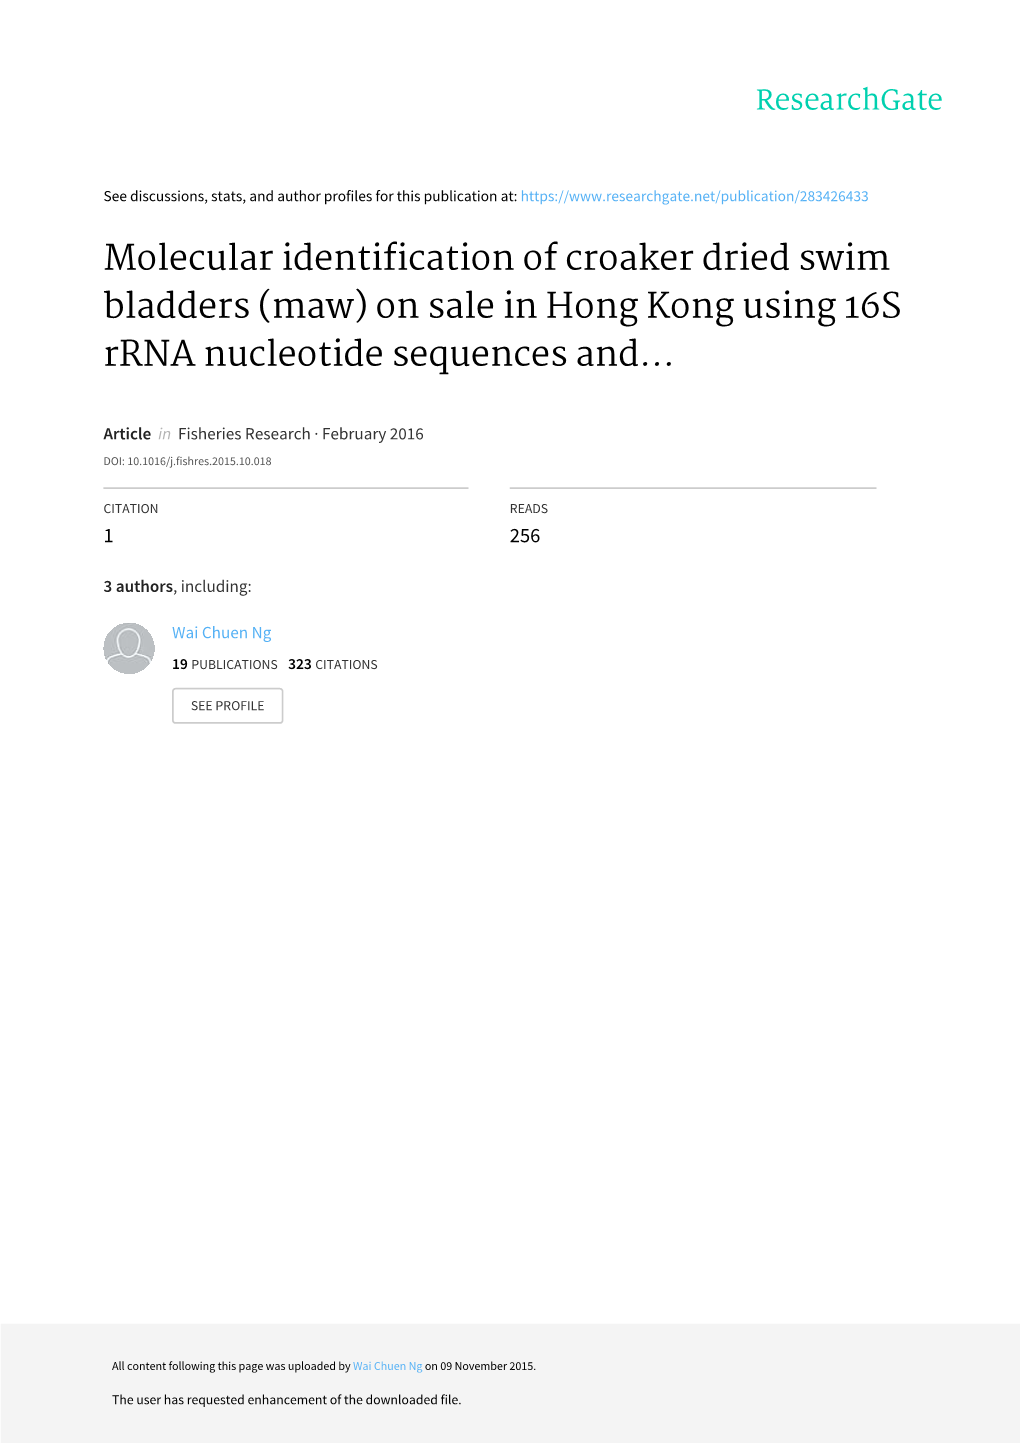 Molecular Identification of Croaker Dried Swim Bladders (Maw) on Sale in Hong Kong Using 16S Rrna Nucleotide Sequences And